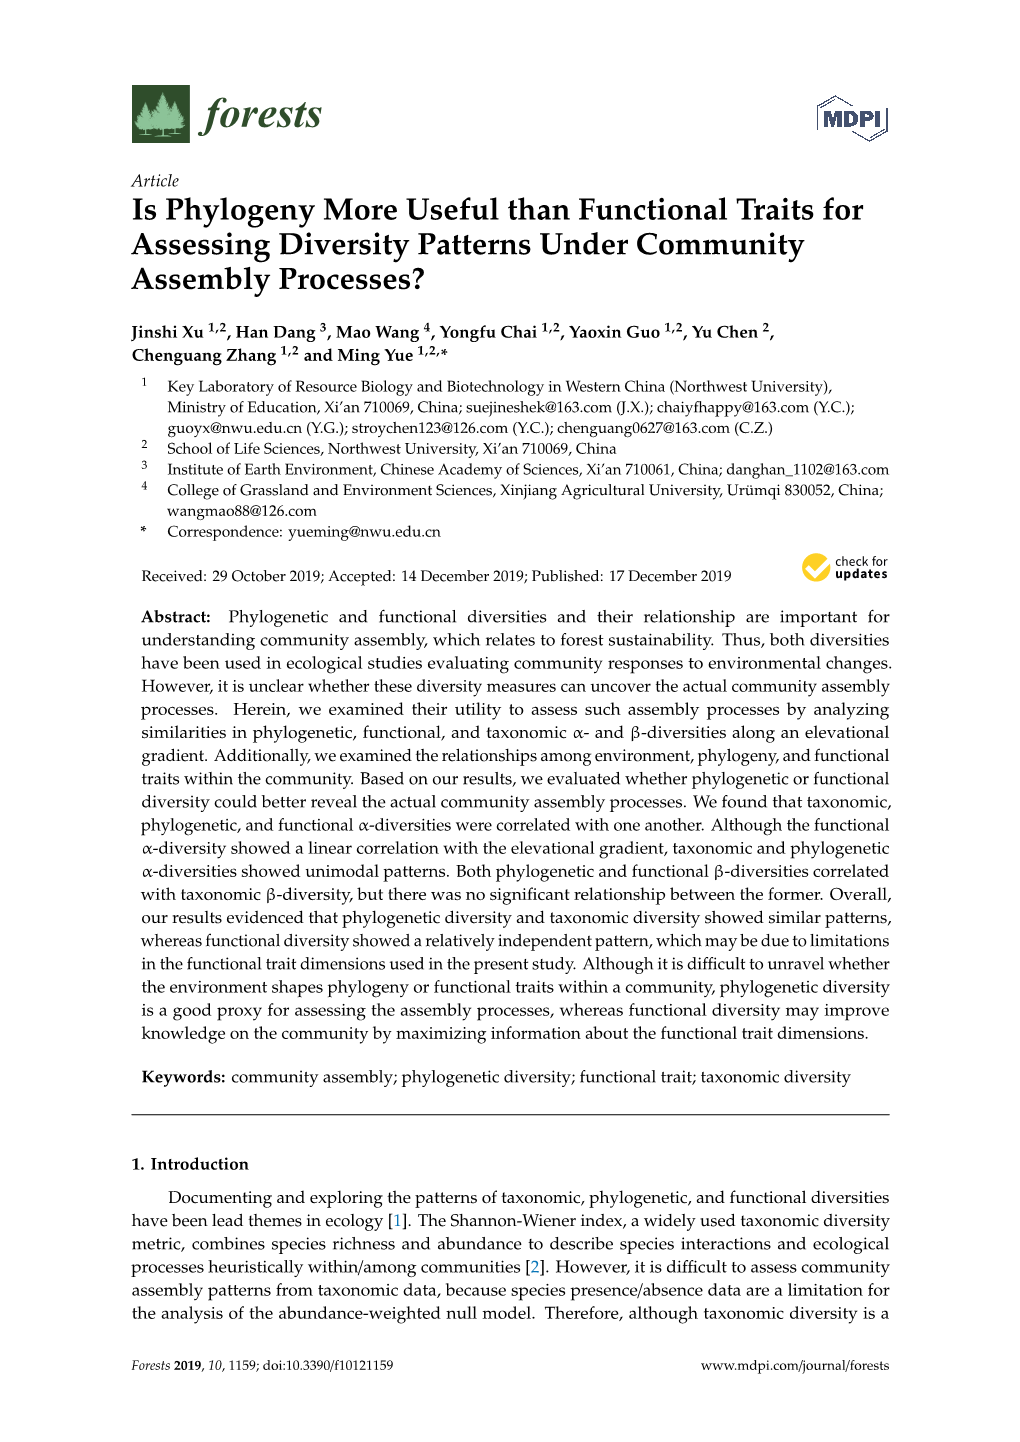 Is Phylogeny More Useful Than Functional Traits for Assessing Diversity Patterns Under Community Assembly Processes?